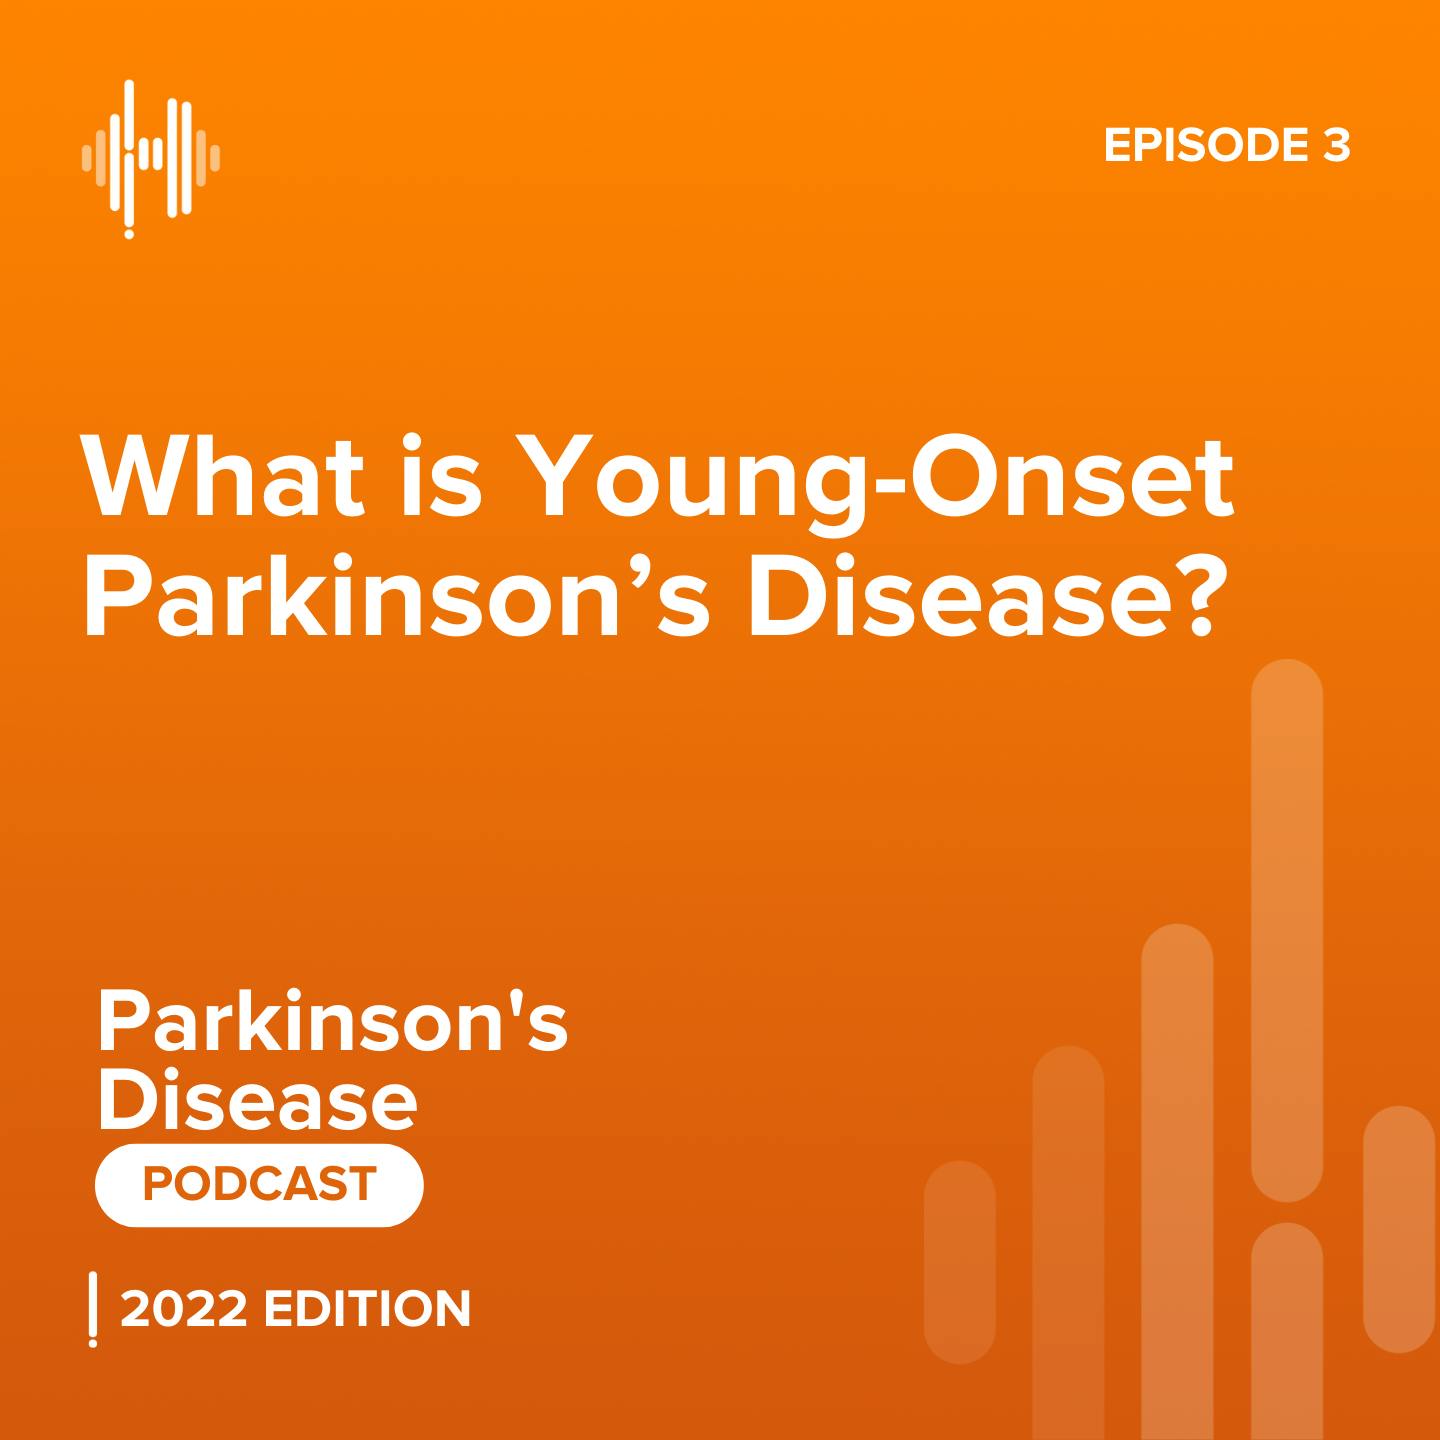 Ep 3: What is Young-Onset Parkinson’s Disease?